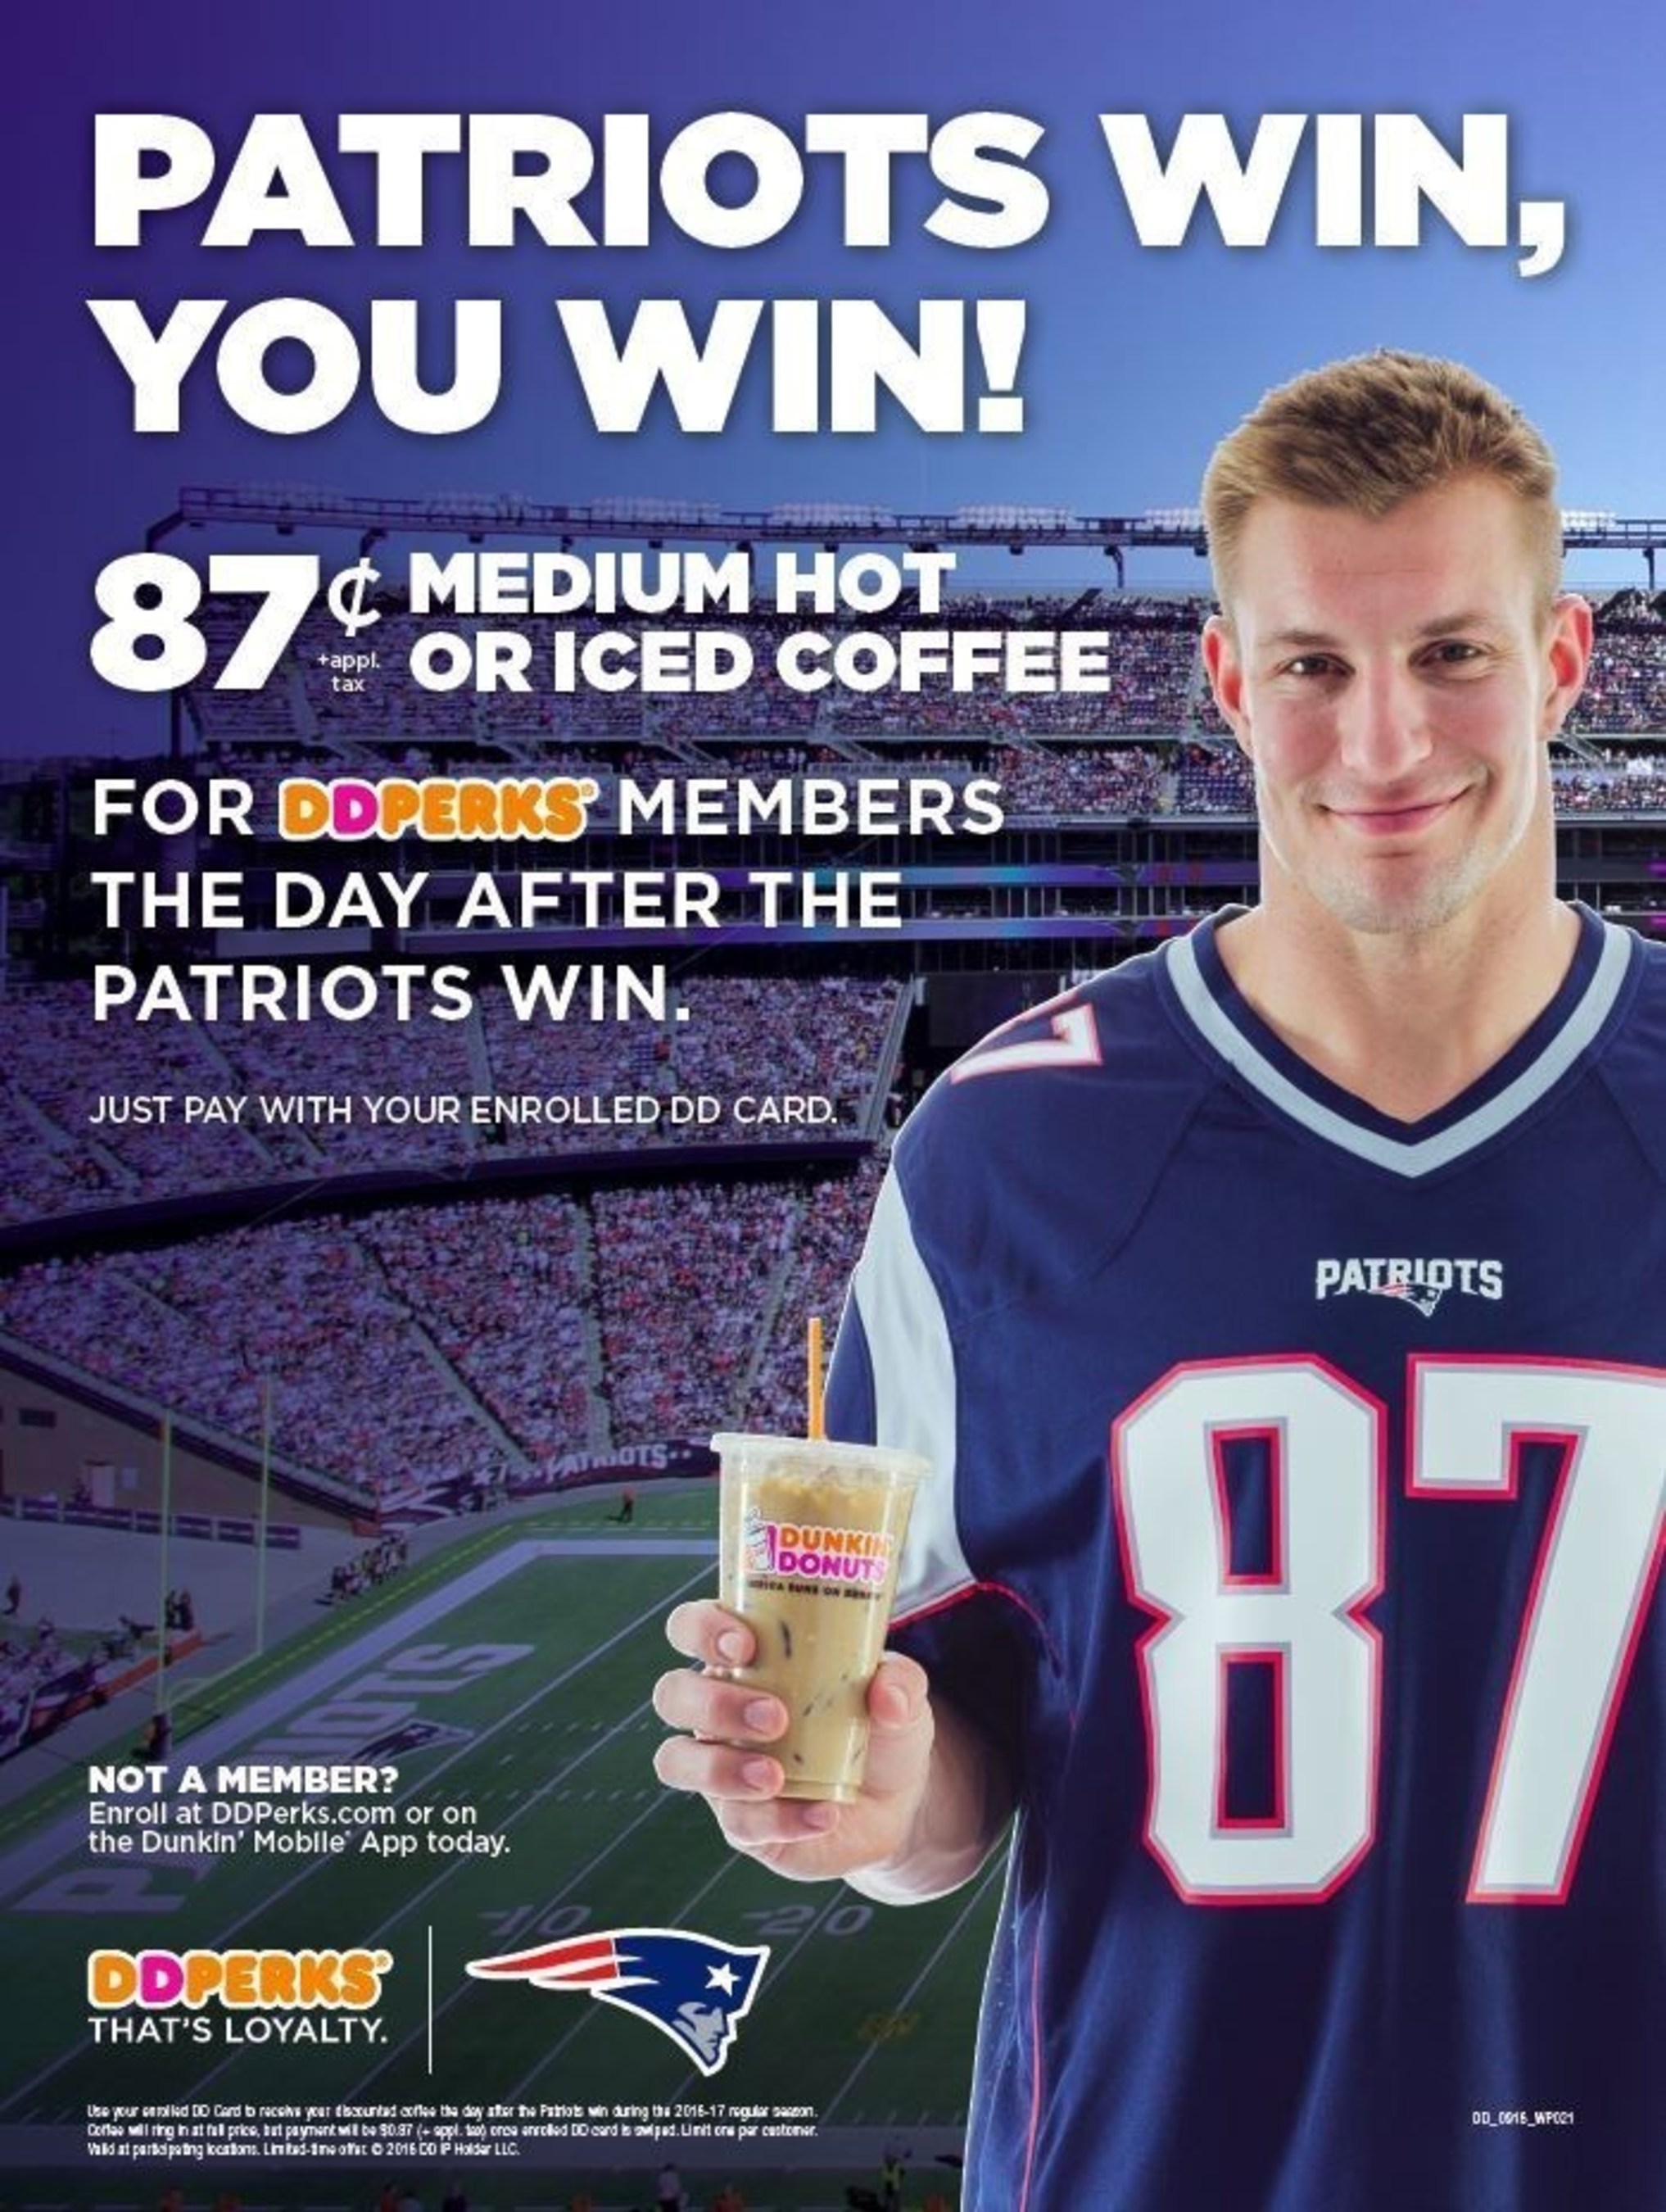 DUNKIN' DONUTS ANNOUNCES RETURN OF "PATS WIN, YOU WIN" COFFEE OFFER FOR DD PERKS(R) MEMBERS